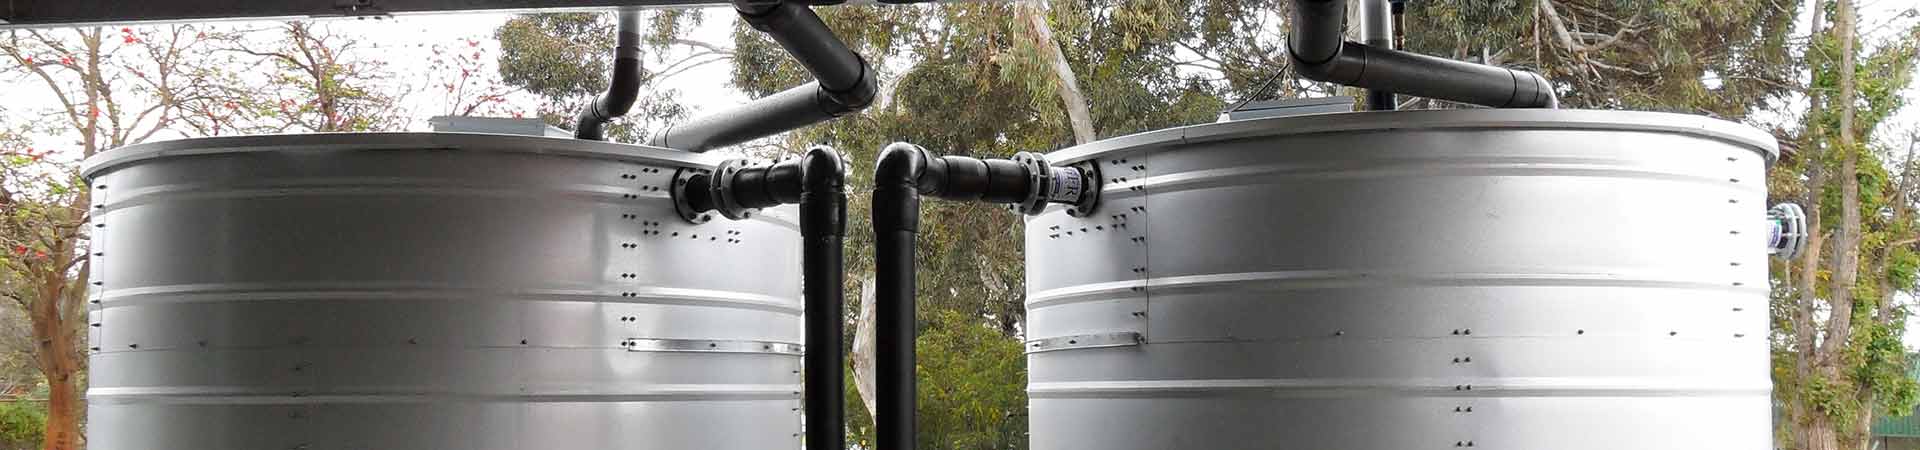 Water Tank Cleaning, Installation & Repair Service